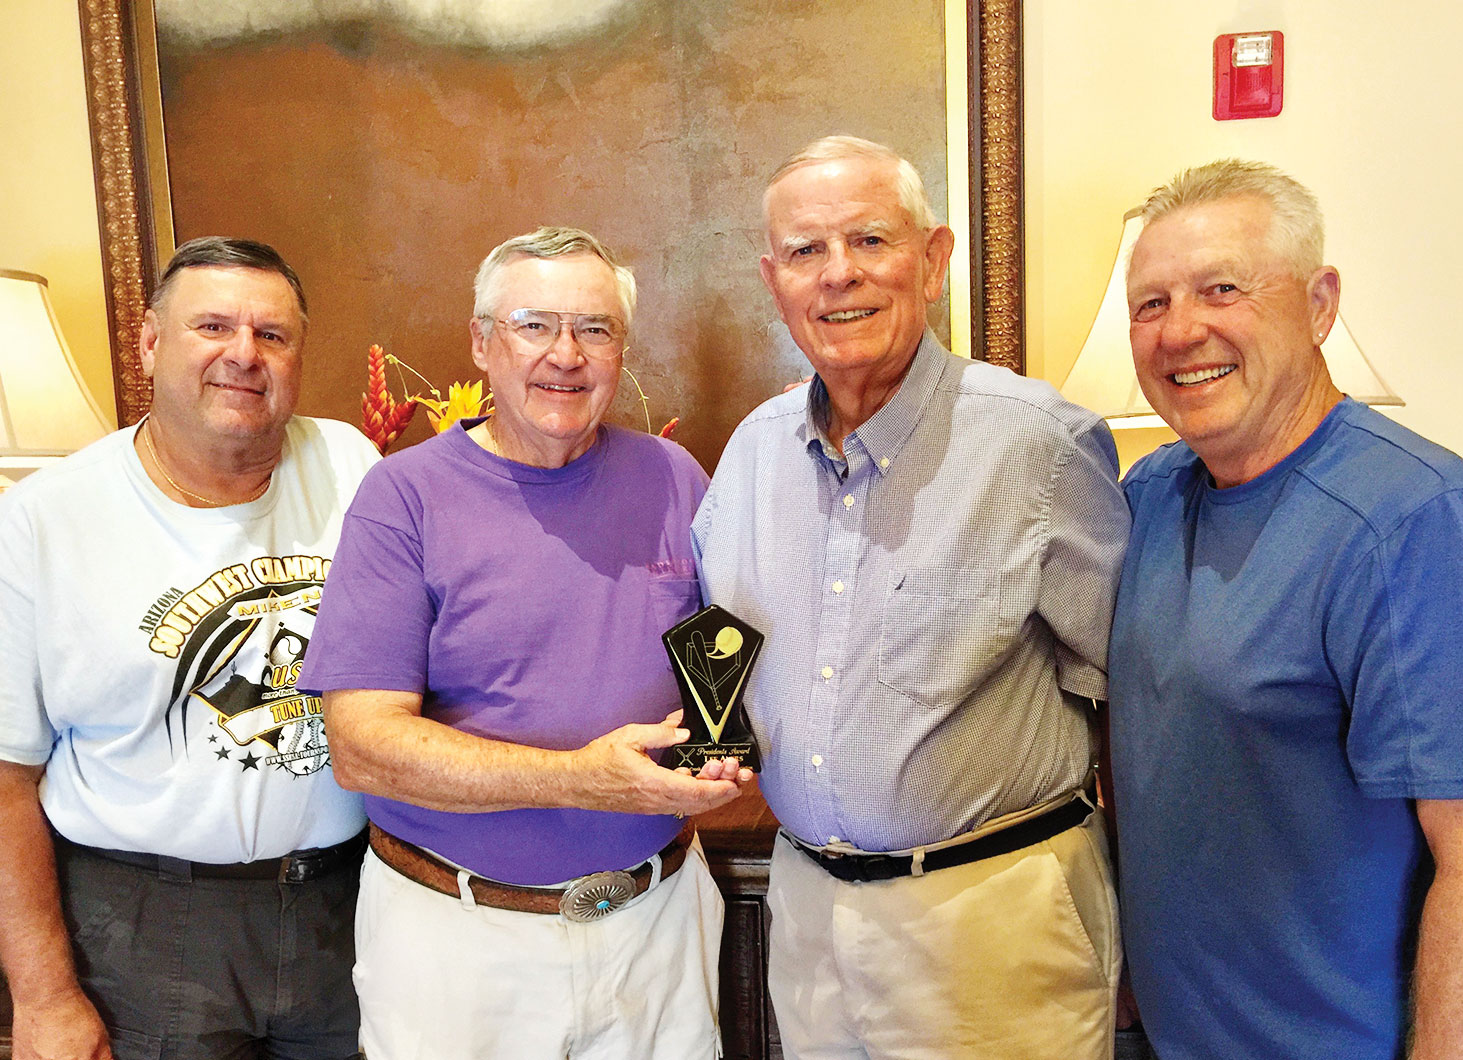 Awardees of this year’s President Award are Dick Gwilt and Lee Ayers, photographed here between President Ken Johnson and incoming President Steve Ward.